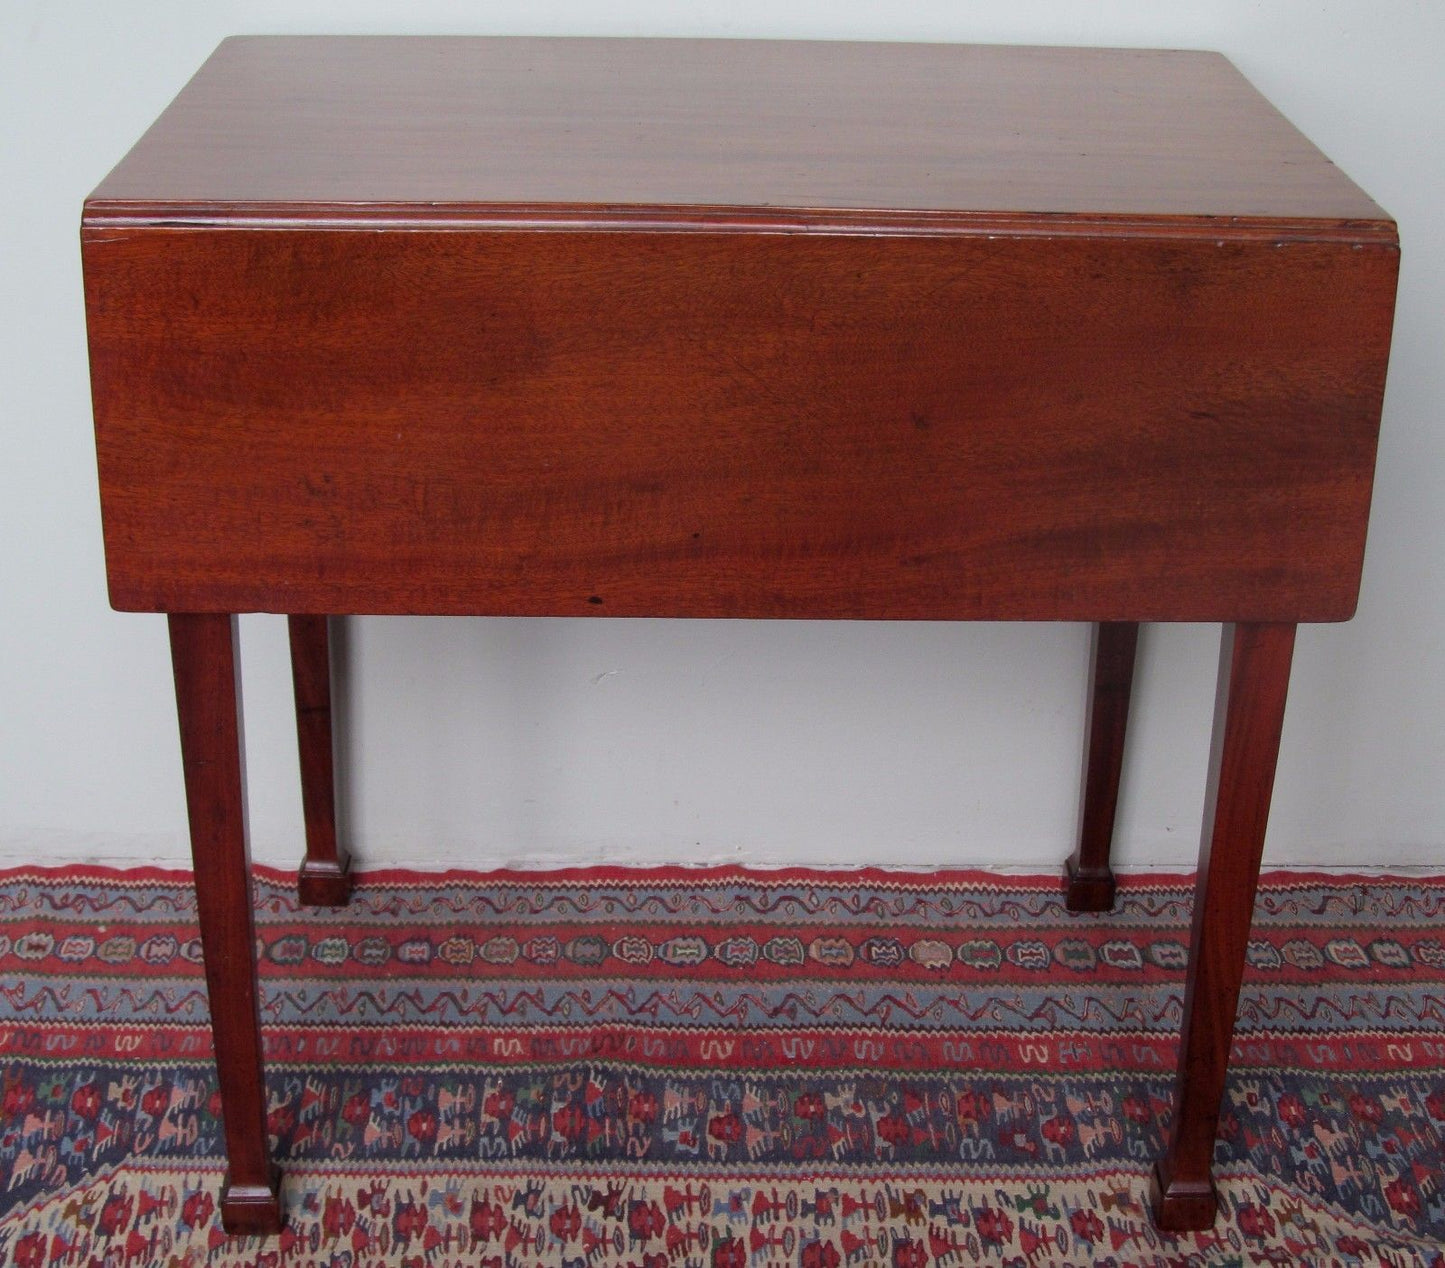 18TH CENTURY SOUTHERN COLONIES CHIPPENDALE FIGURED MAHOGANY PEMBROKE TABLE